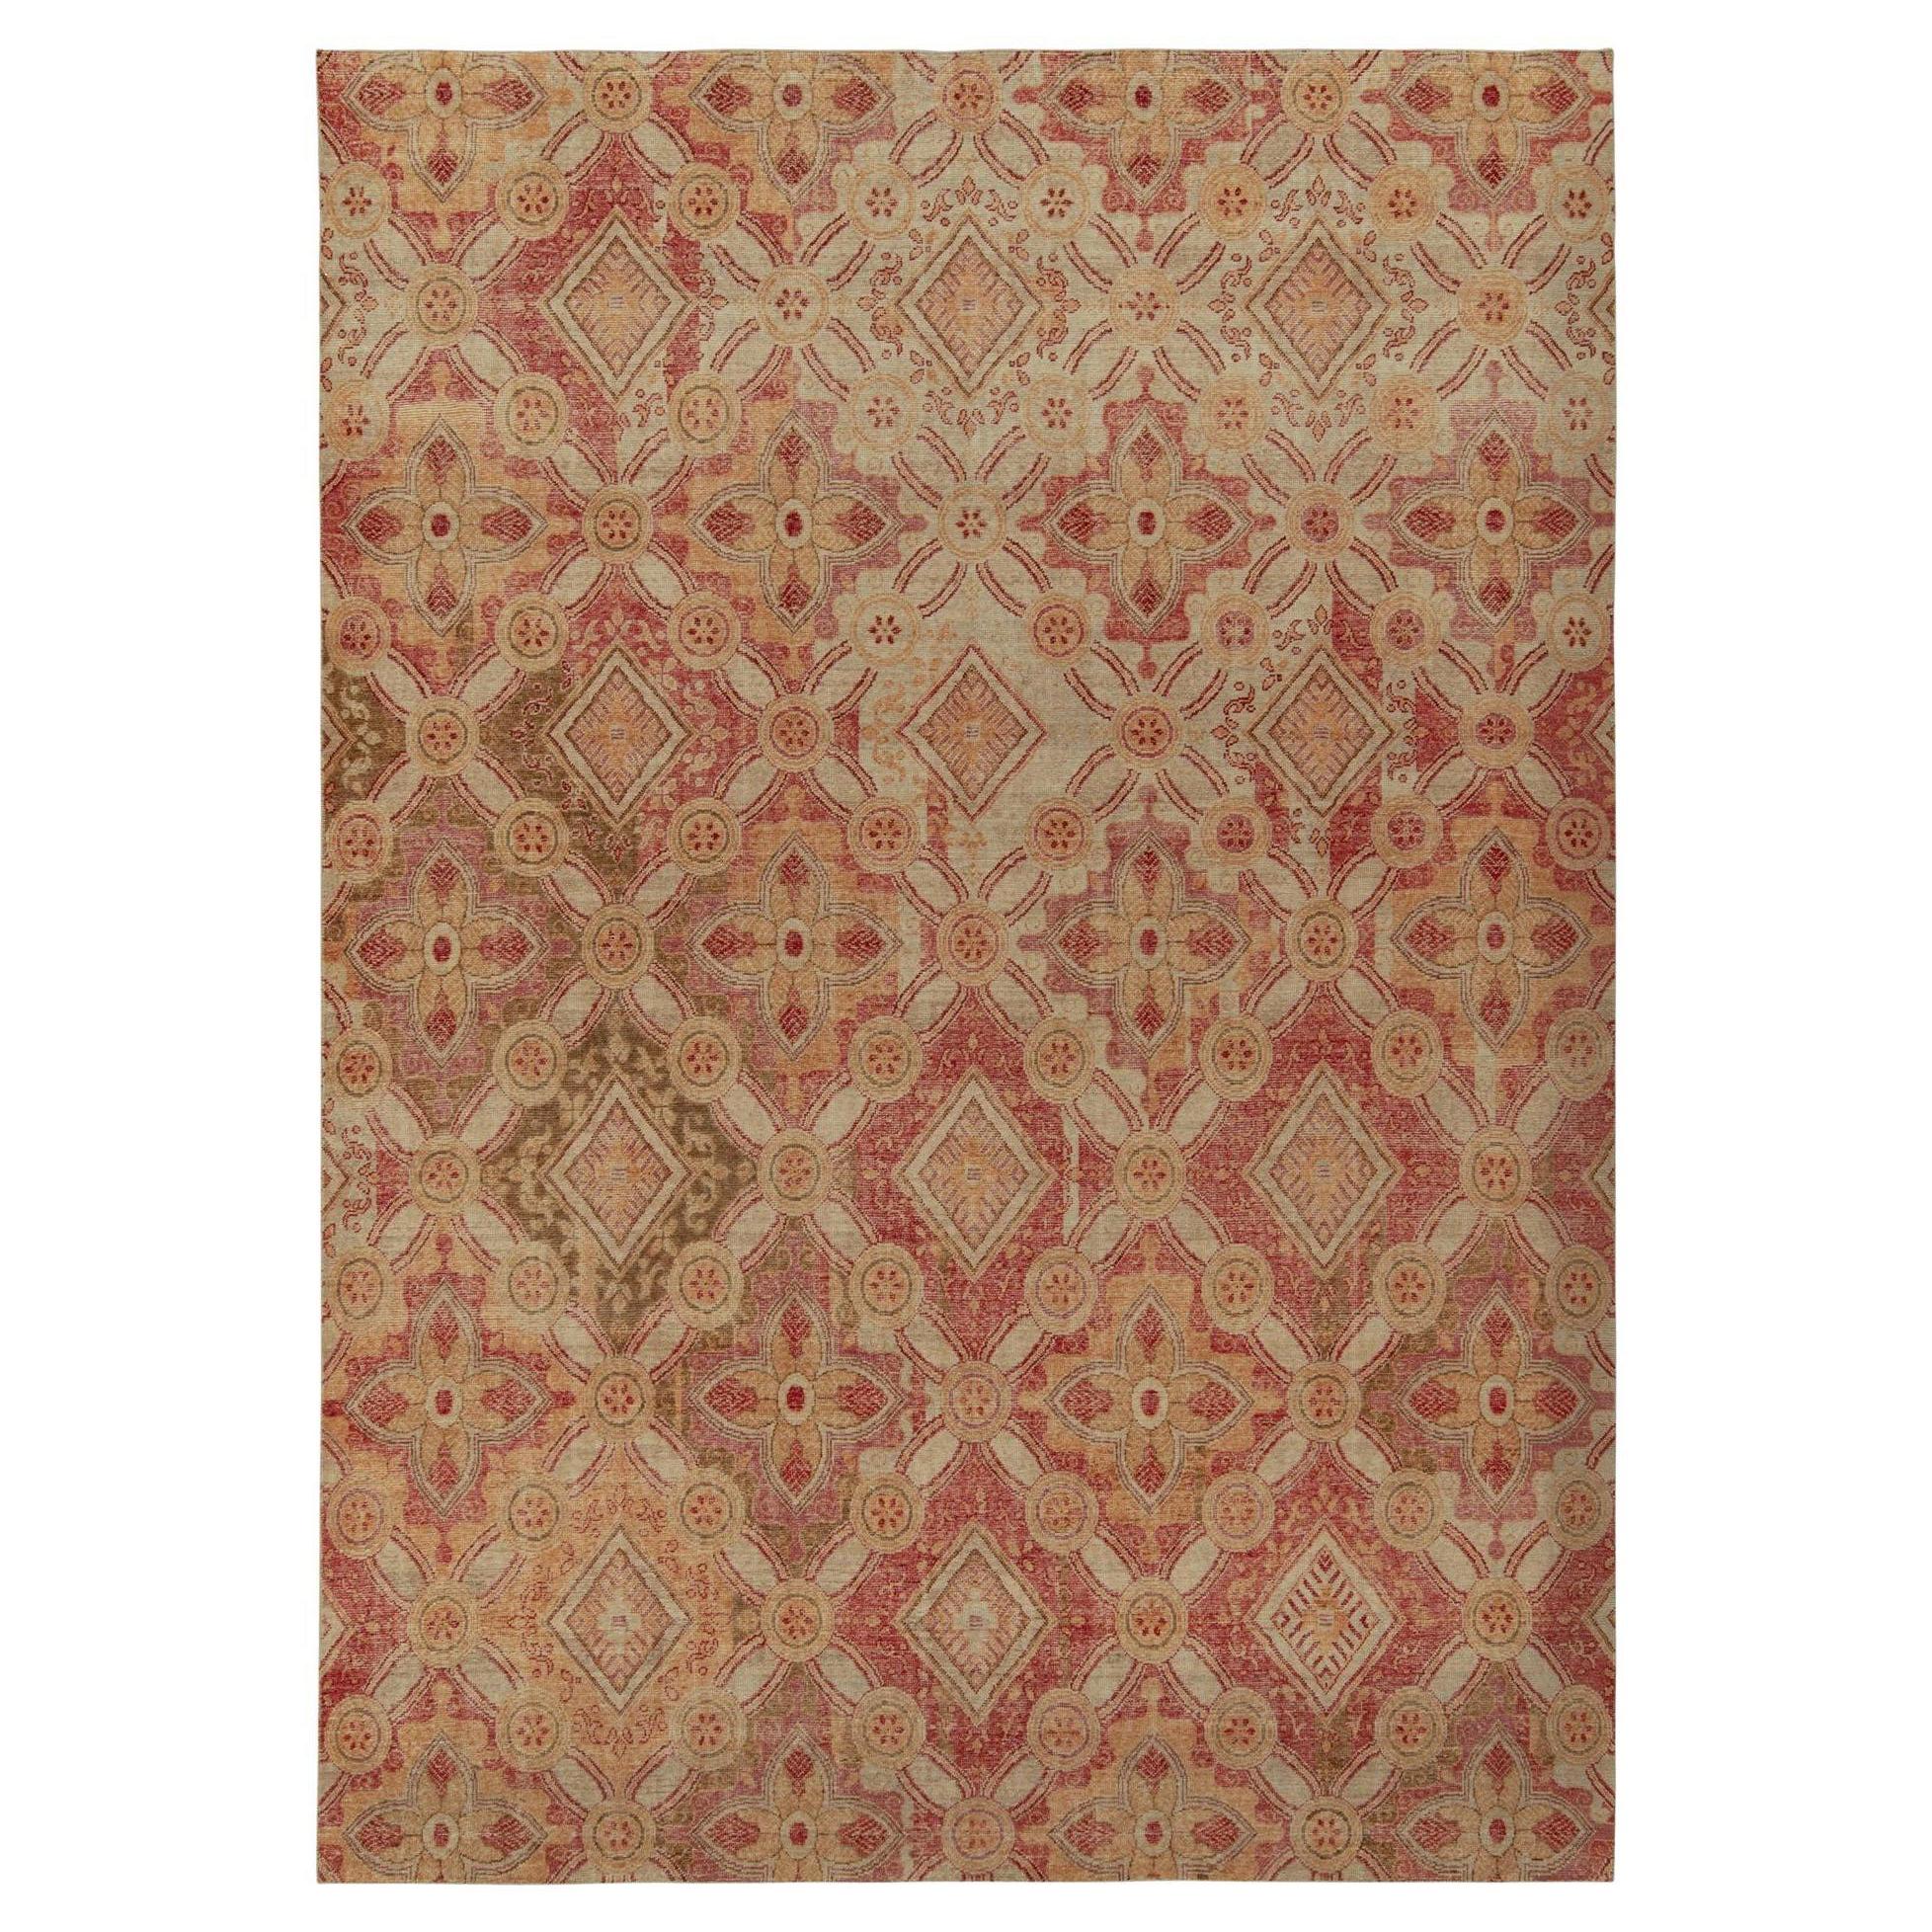 Rug & Kilim’s Distressed Style Rug in Red, Gold and Beige-Brown Trellises For Sale